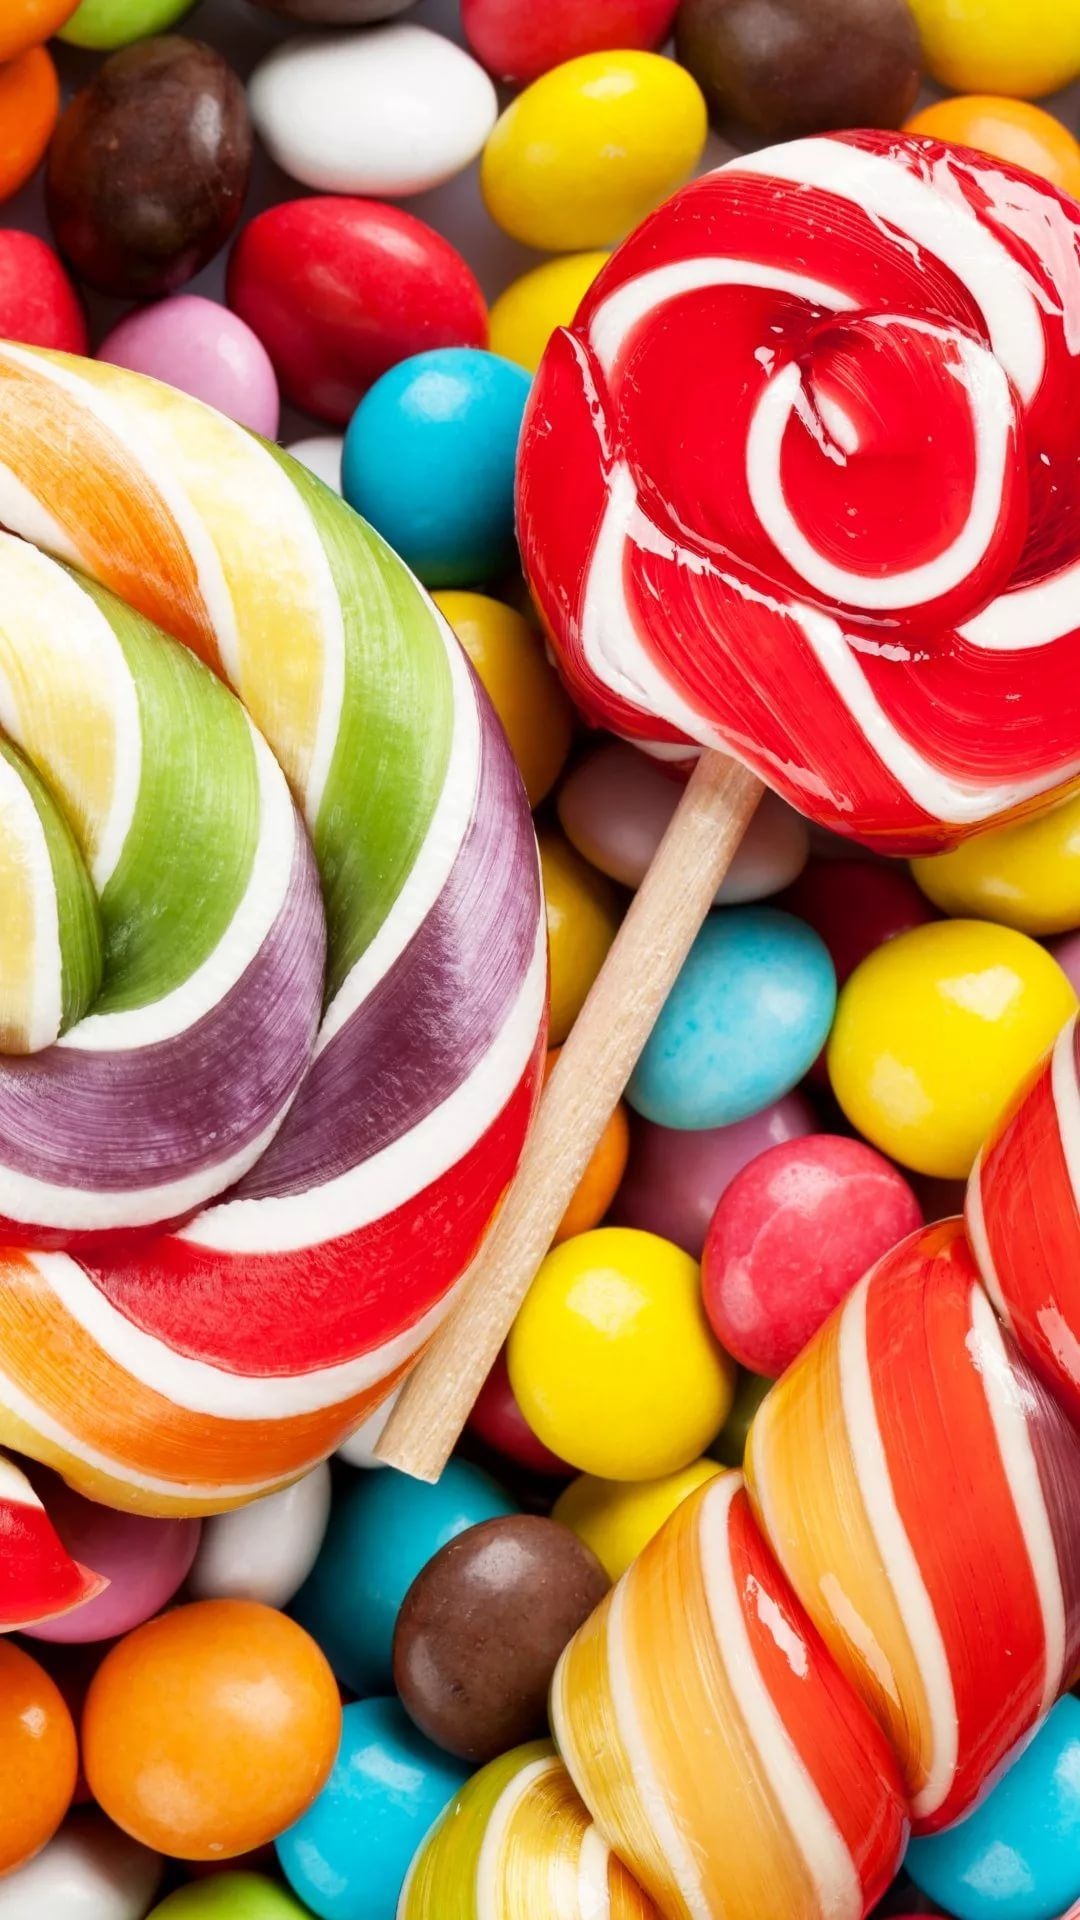 Candy-themed phone wallpapers, Colorful and vibrant, Sweet indulgence, Eye-catching design, 1080x1920 Full HD Handy